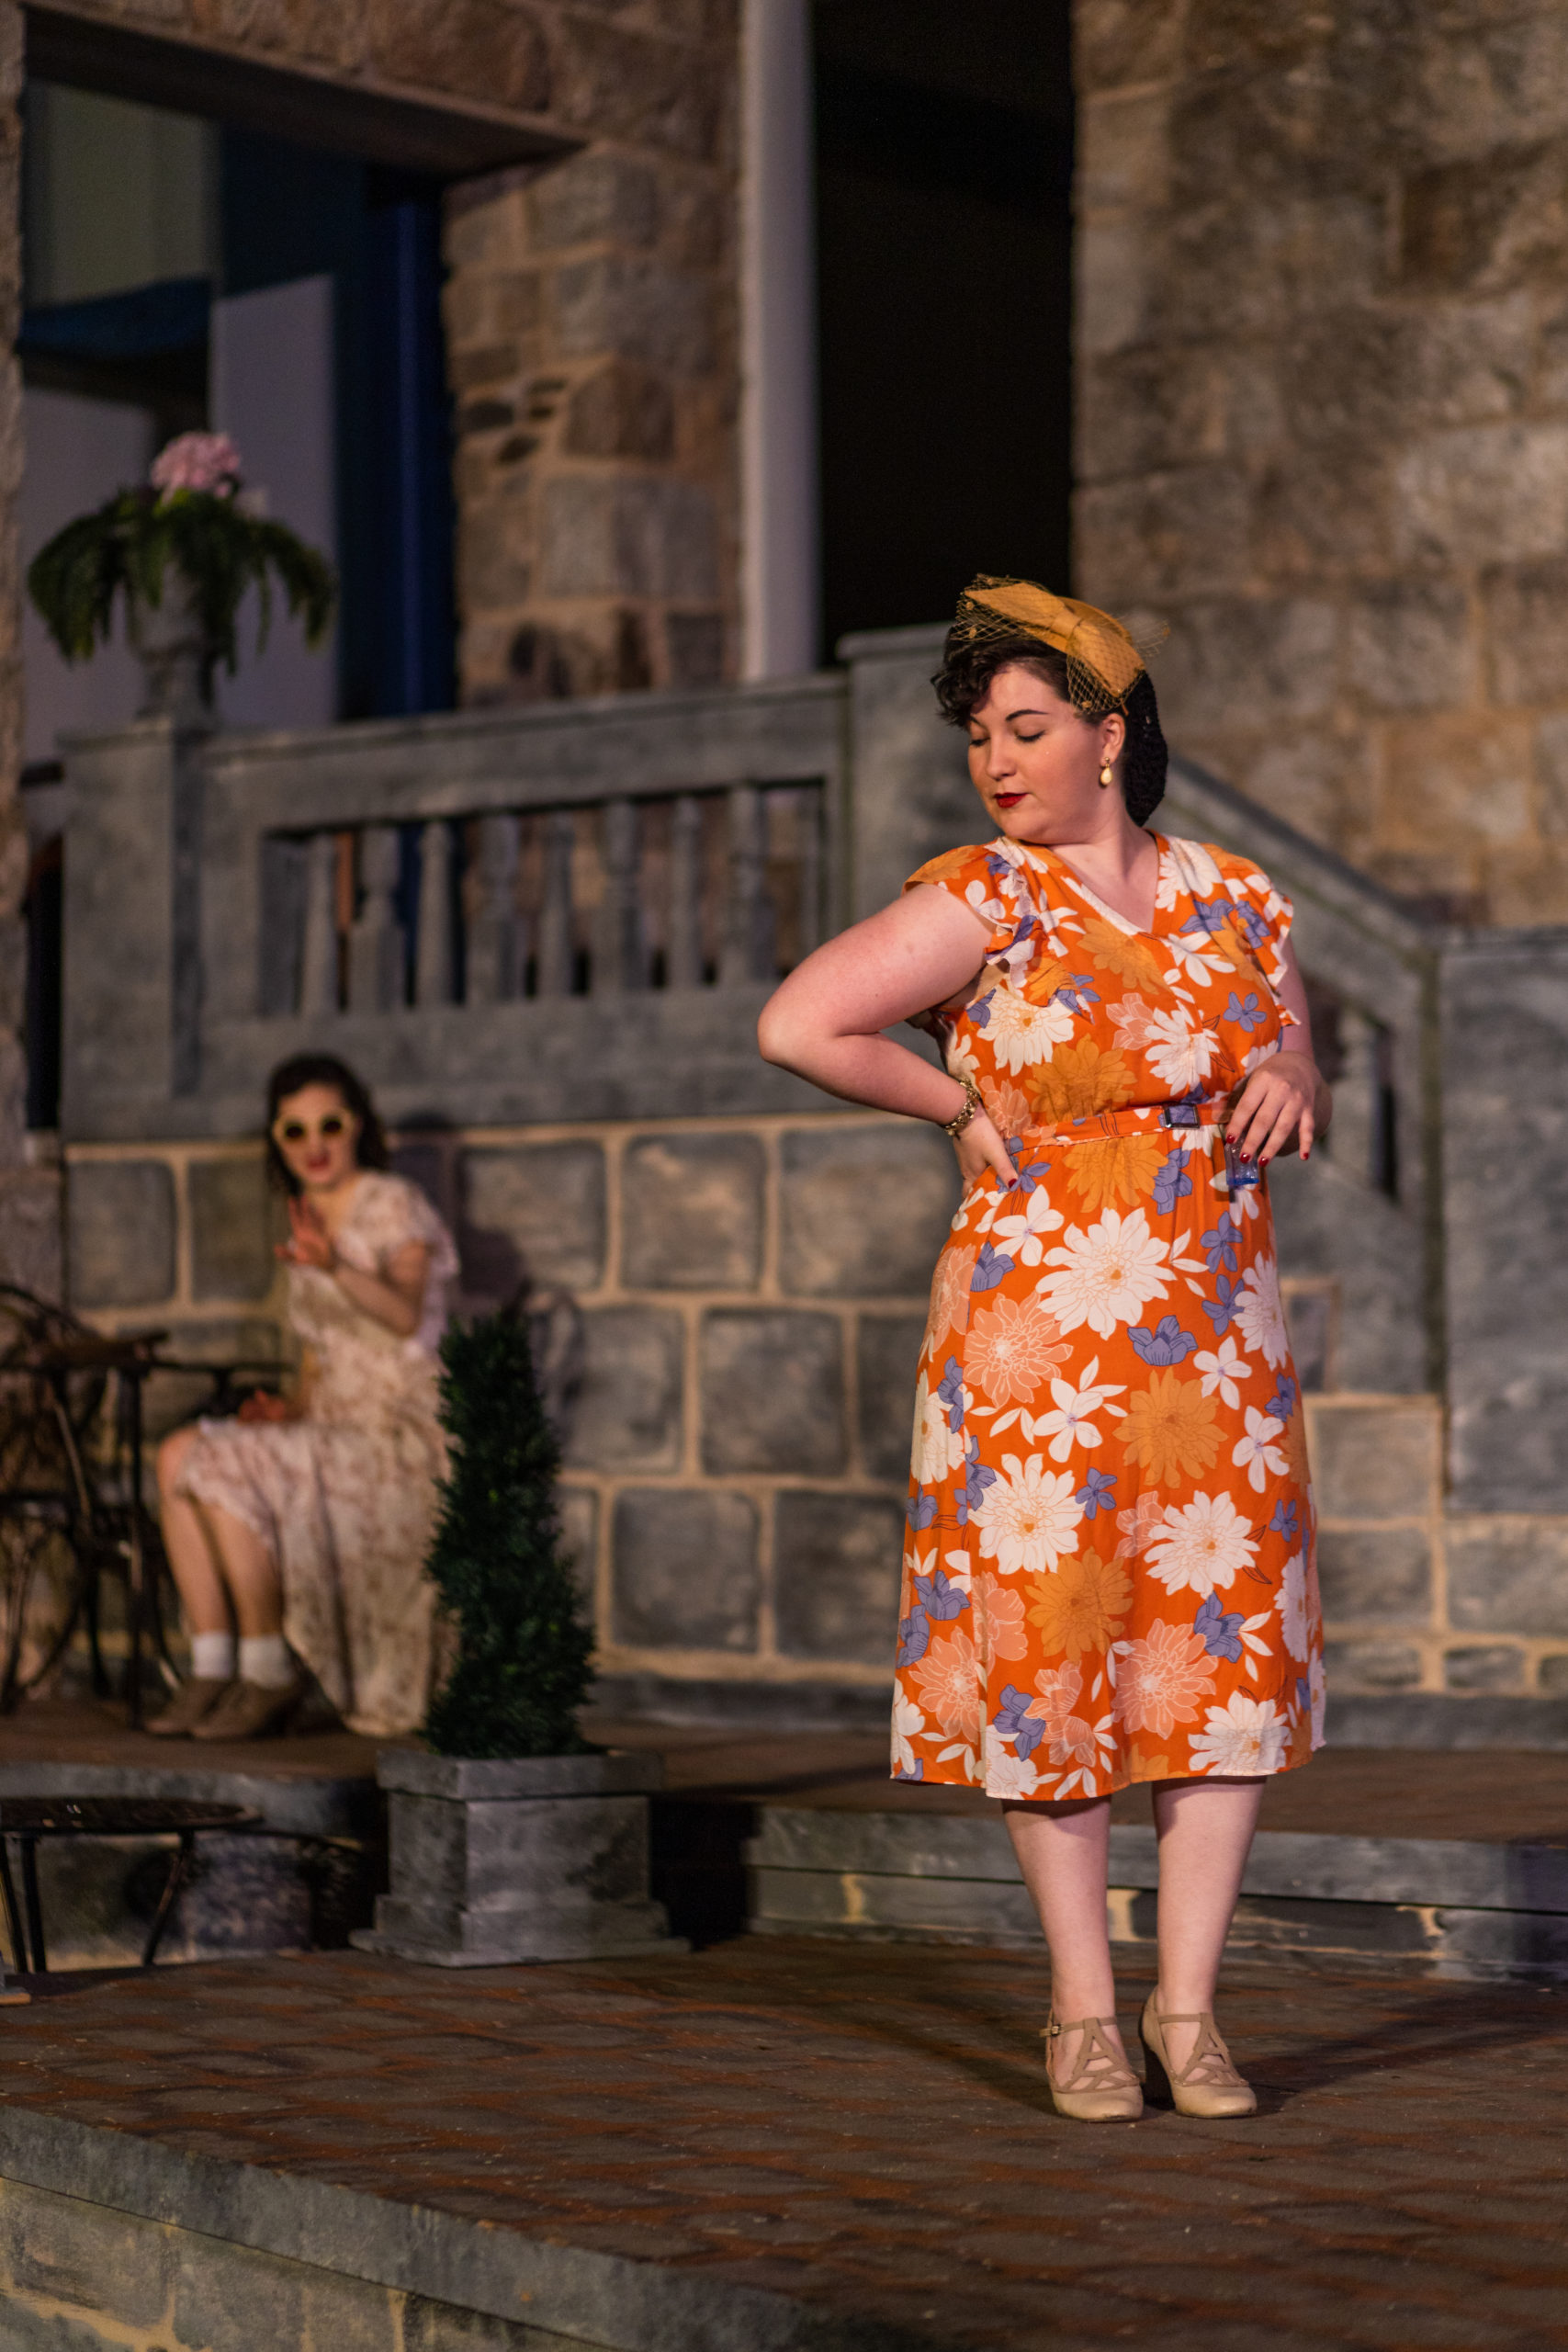 Abigail Funk and Anna DiGiovanni as Margret and Breatrice in Much Ado About Nothing. Photos by Kiirtsn Pagan.